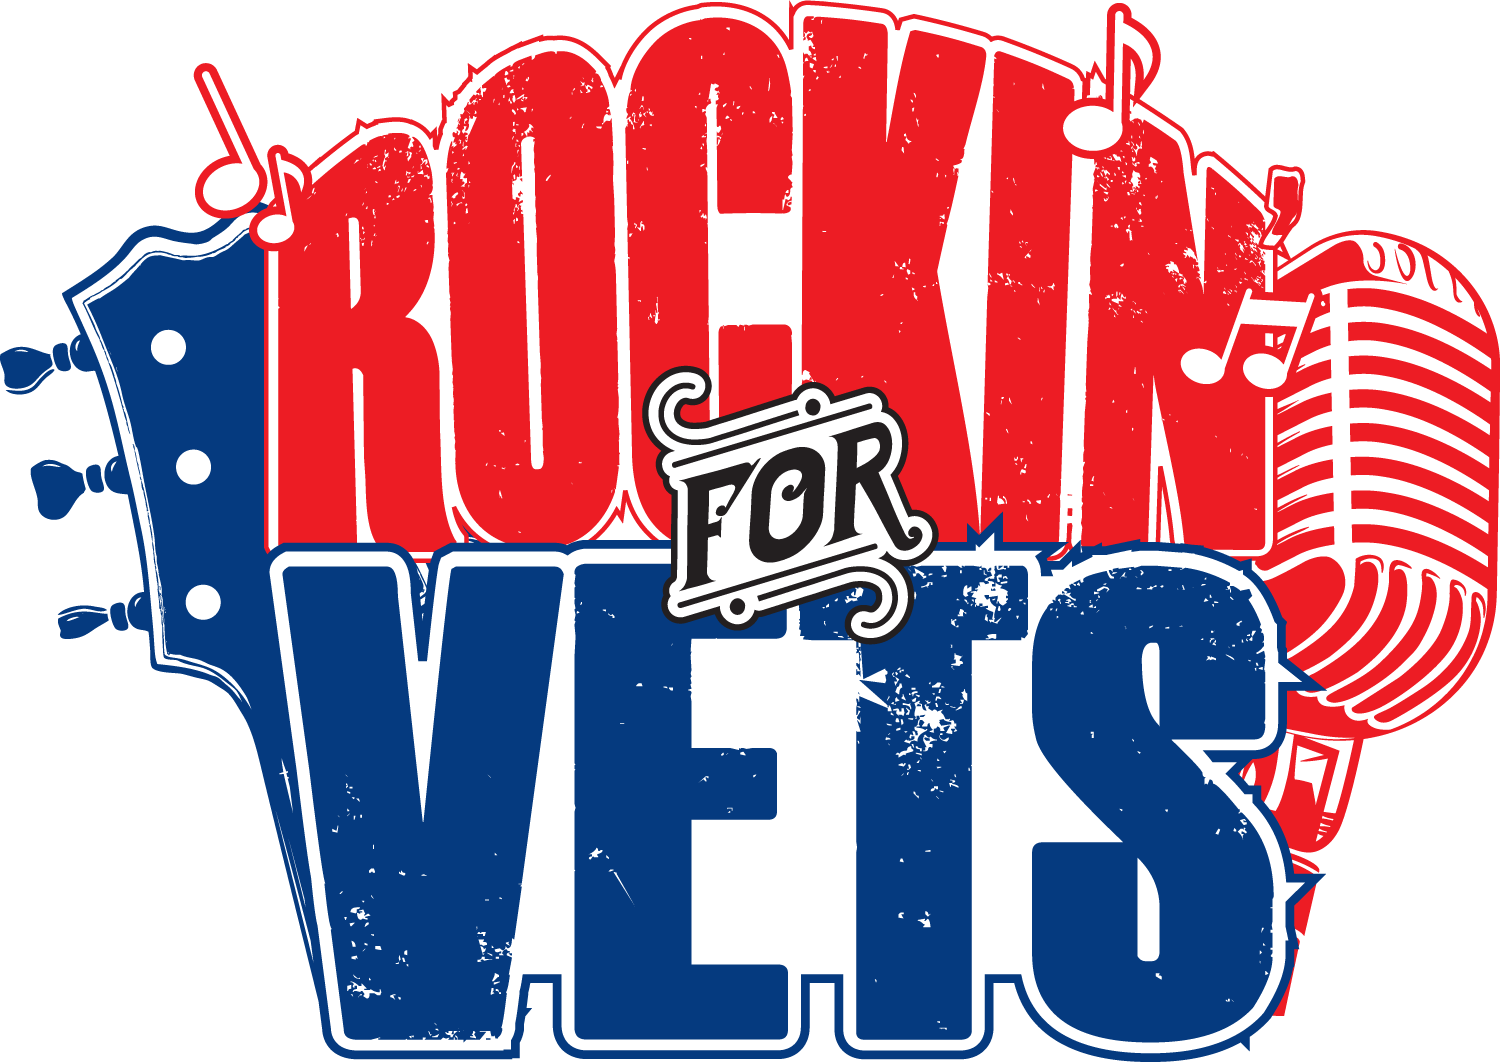 Rockin' for Vets graphic